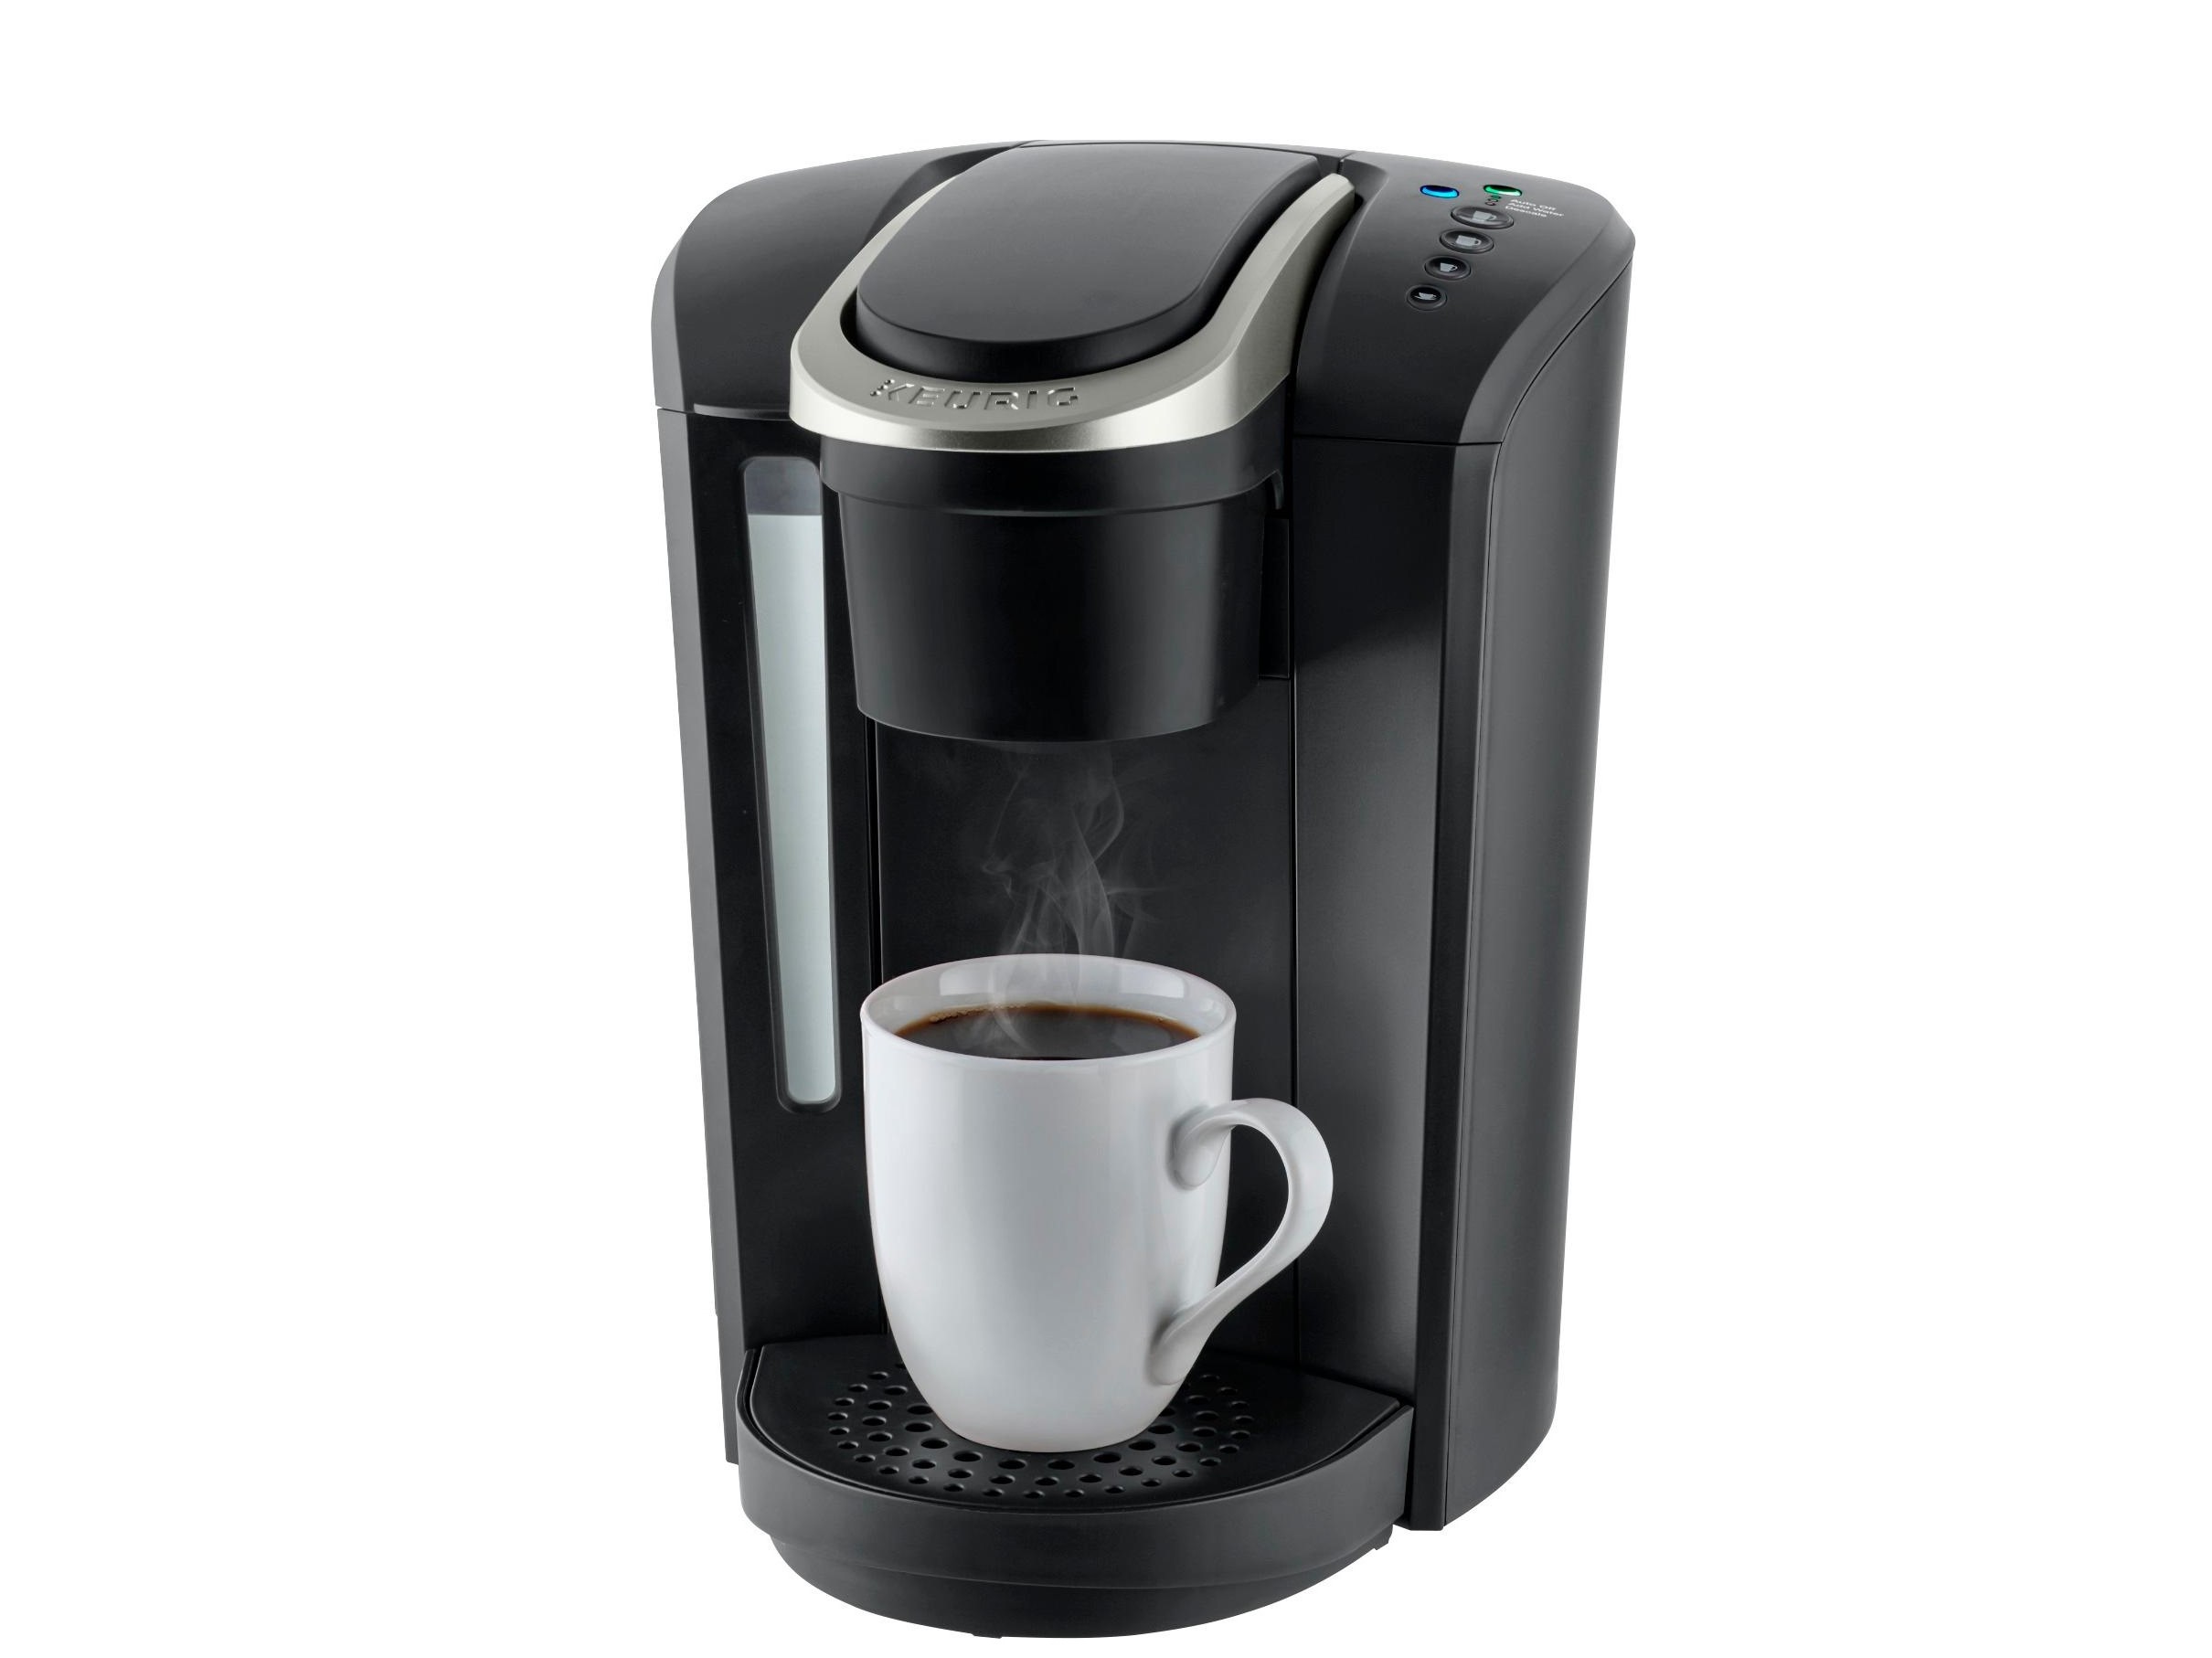 https://www.themanual.com/wp-content/uploads/sites/9/2021/08/keurig-k-select-single-serve-maker-with-mug-and-brew.jpg?fit=2420%2C1814&p=1